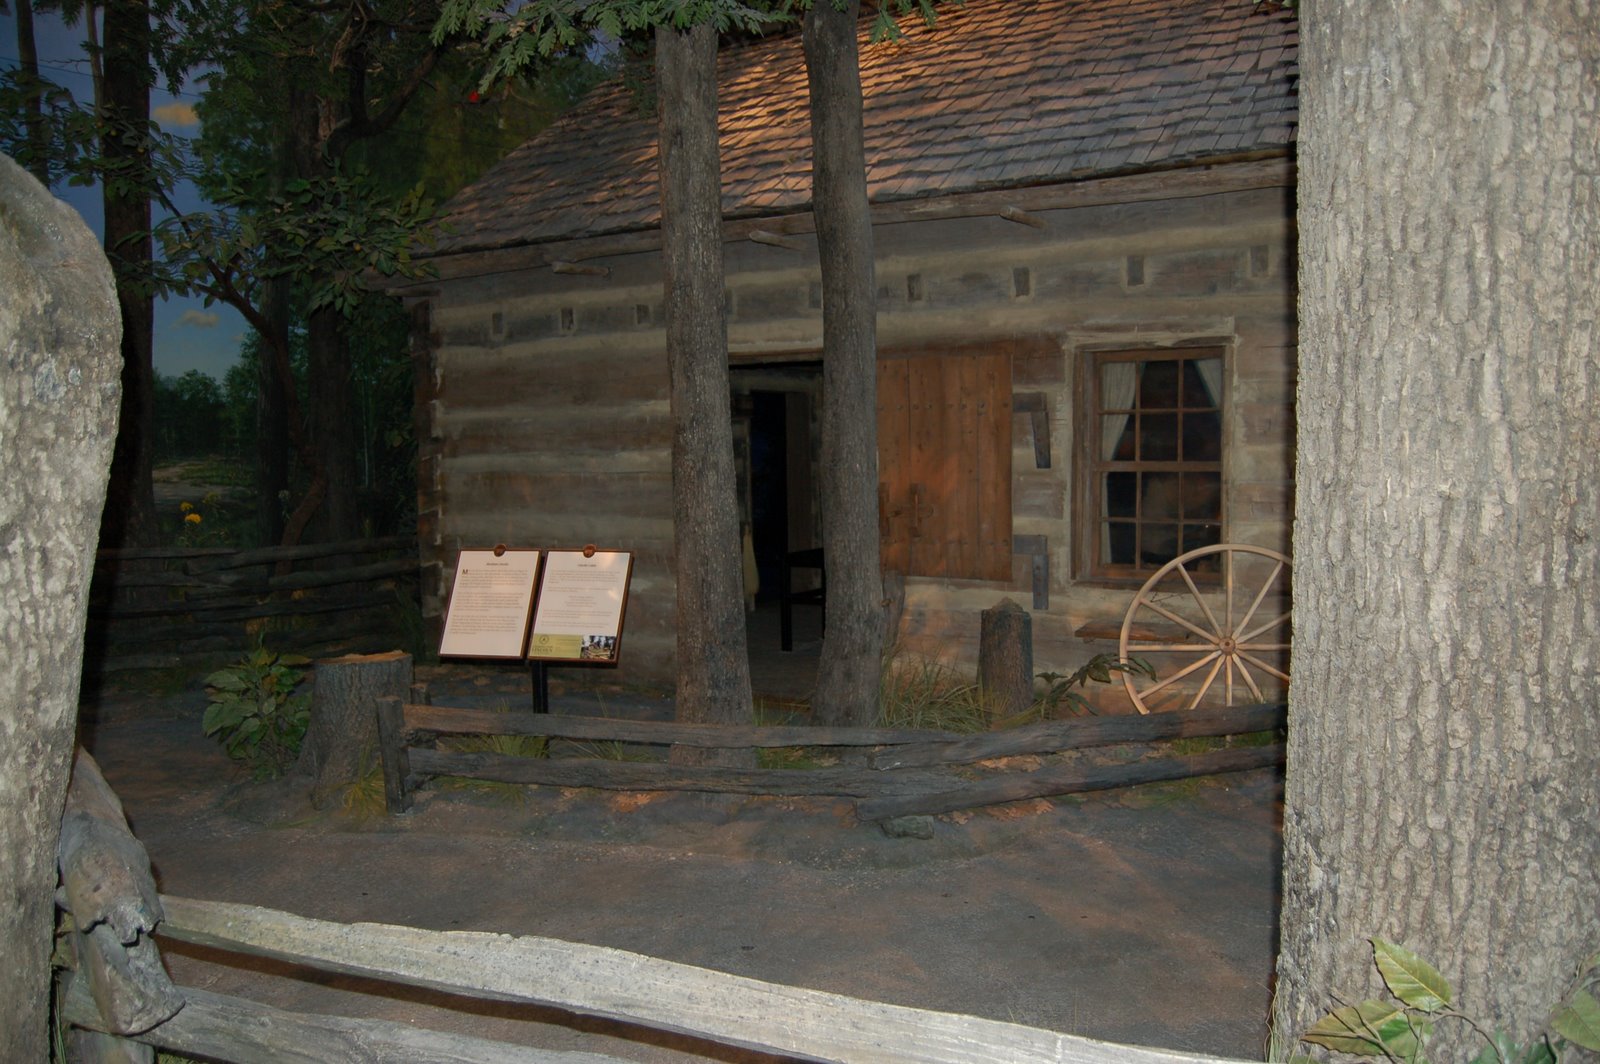 Lincoln's cramped little cabin